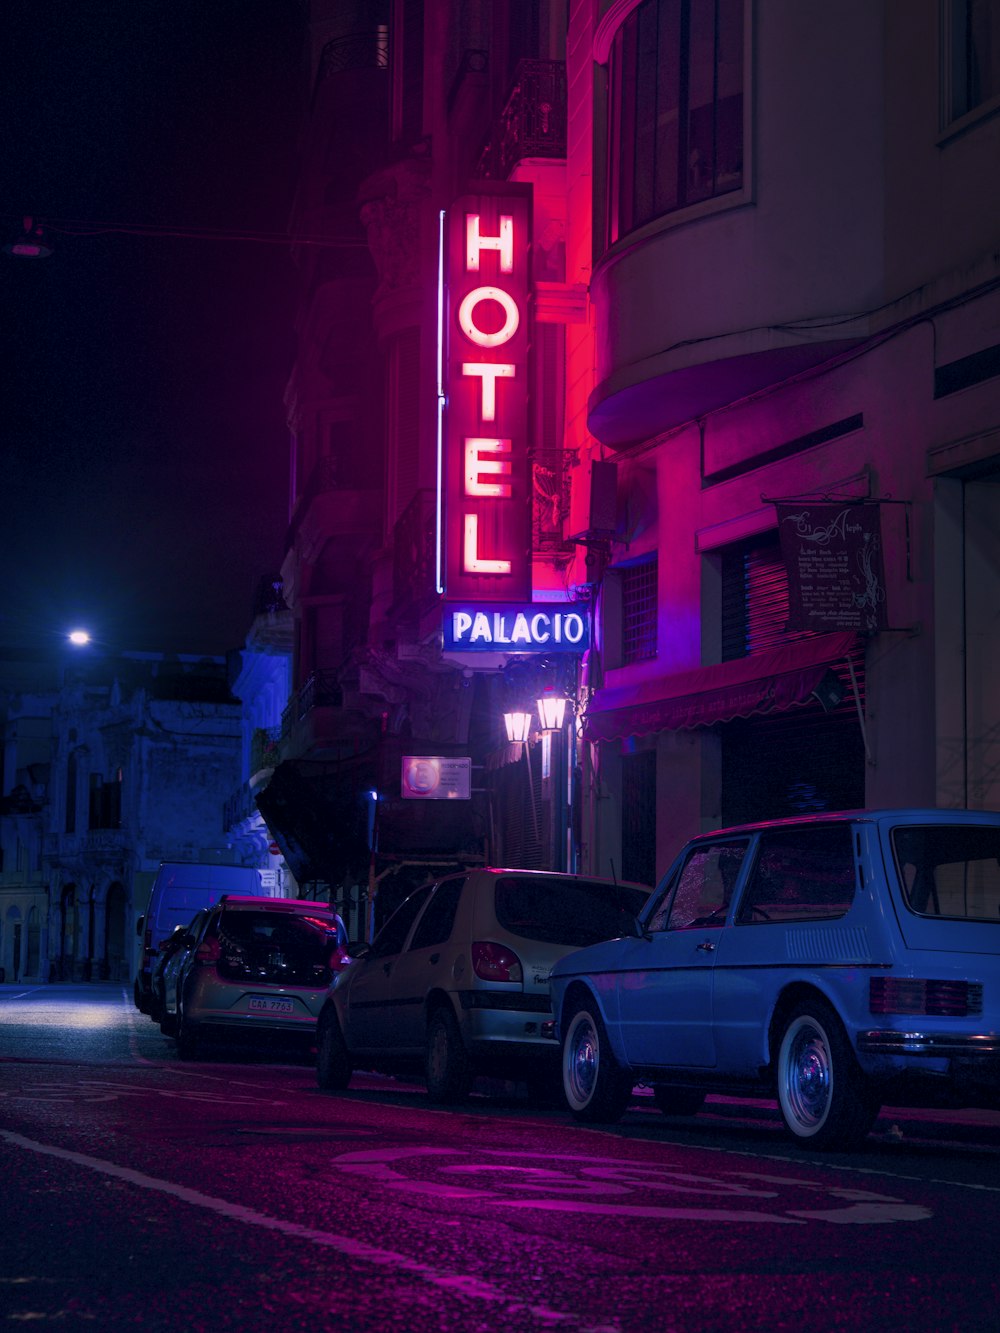 a neon hotel sign lit up at night